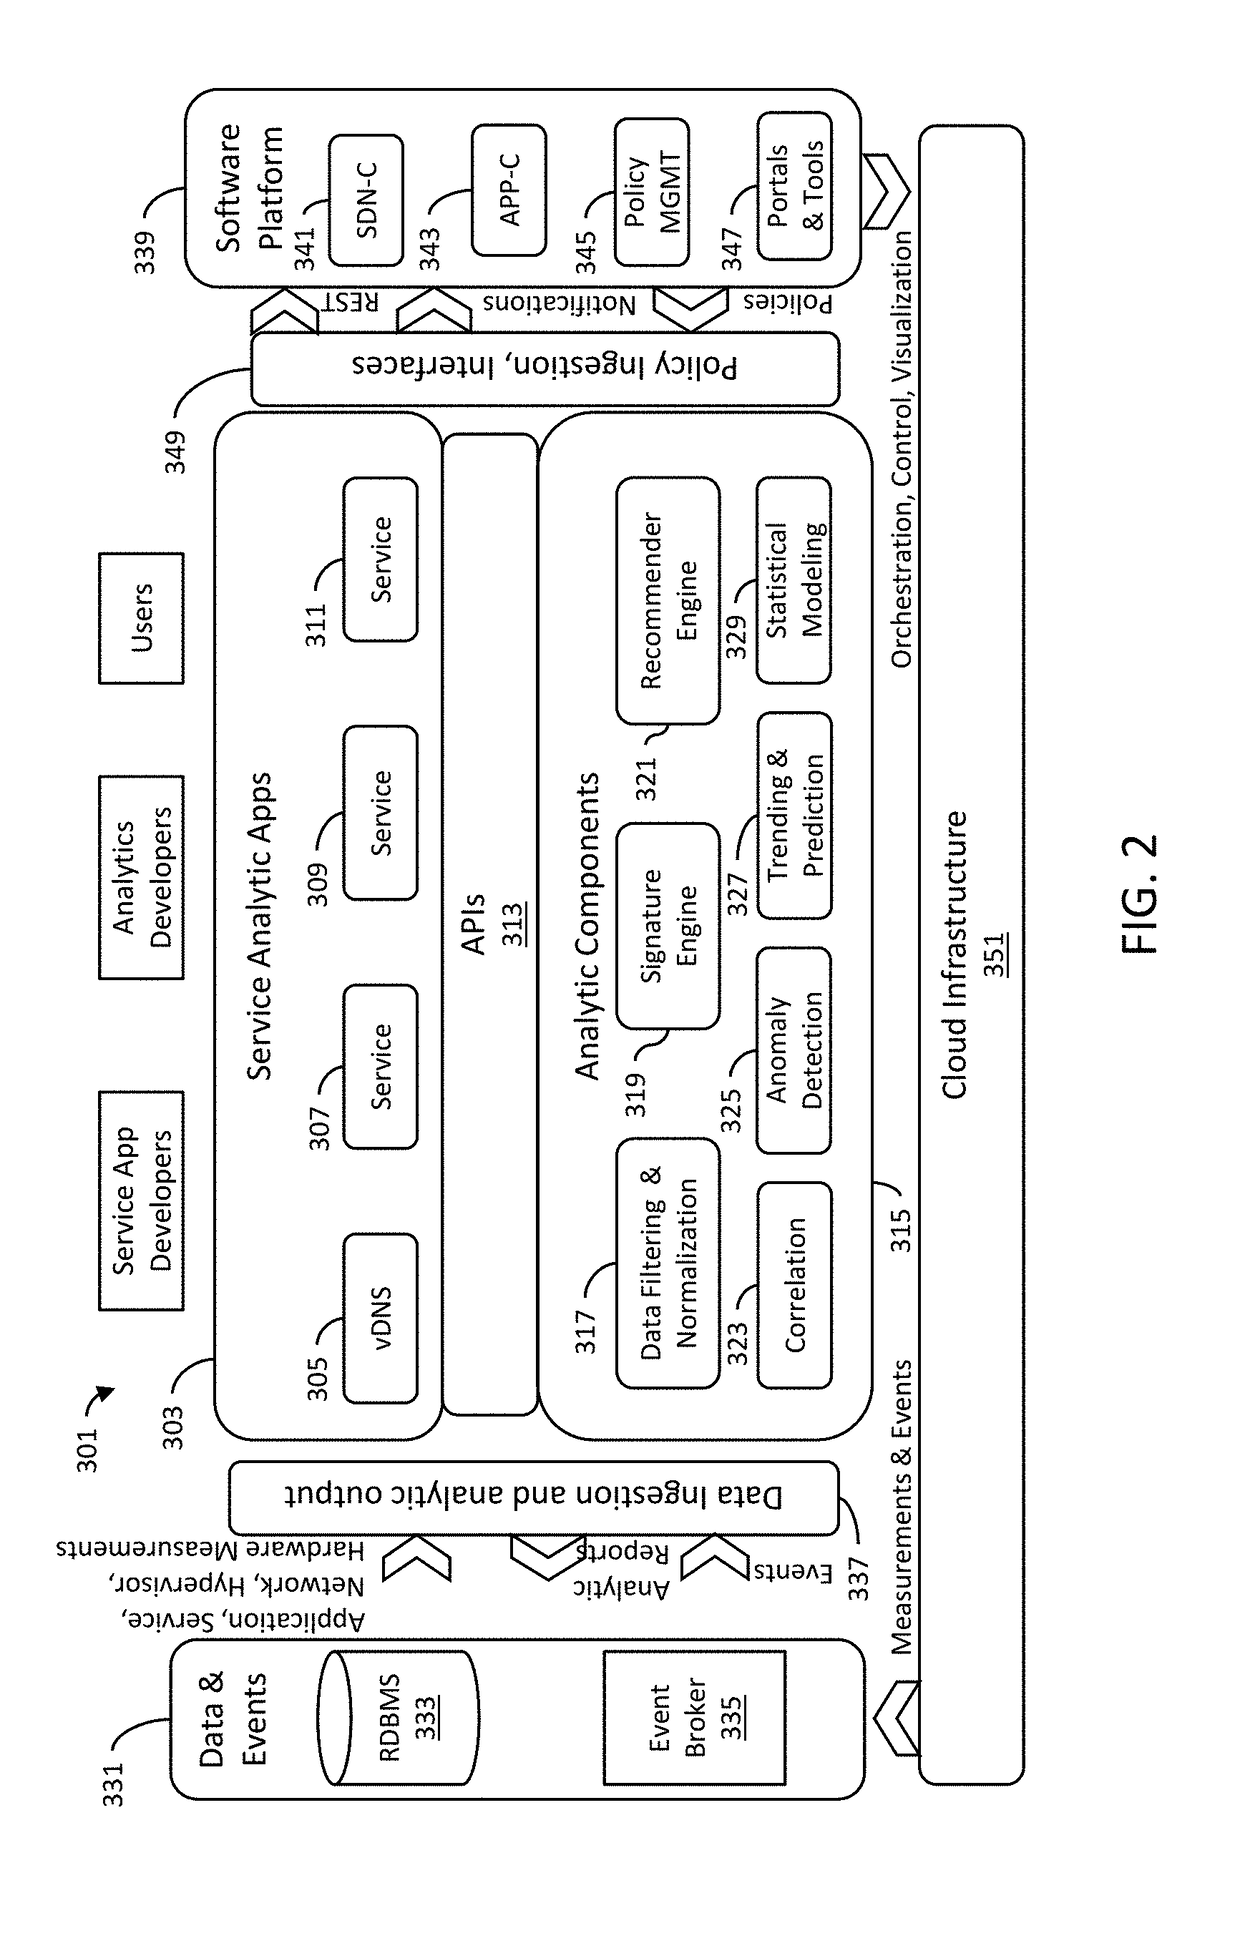 Method and apparatus to control anycast traffic using a software defined network controller